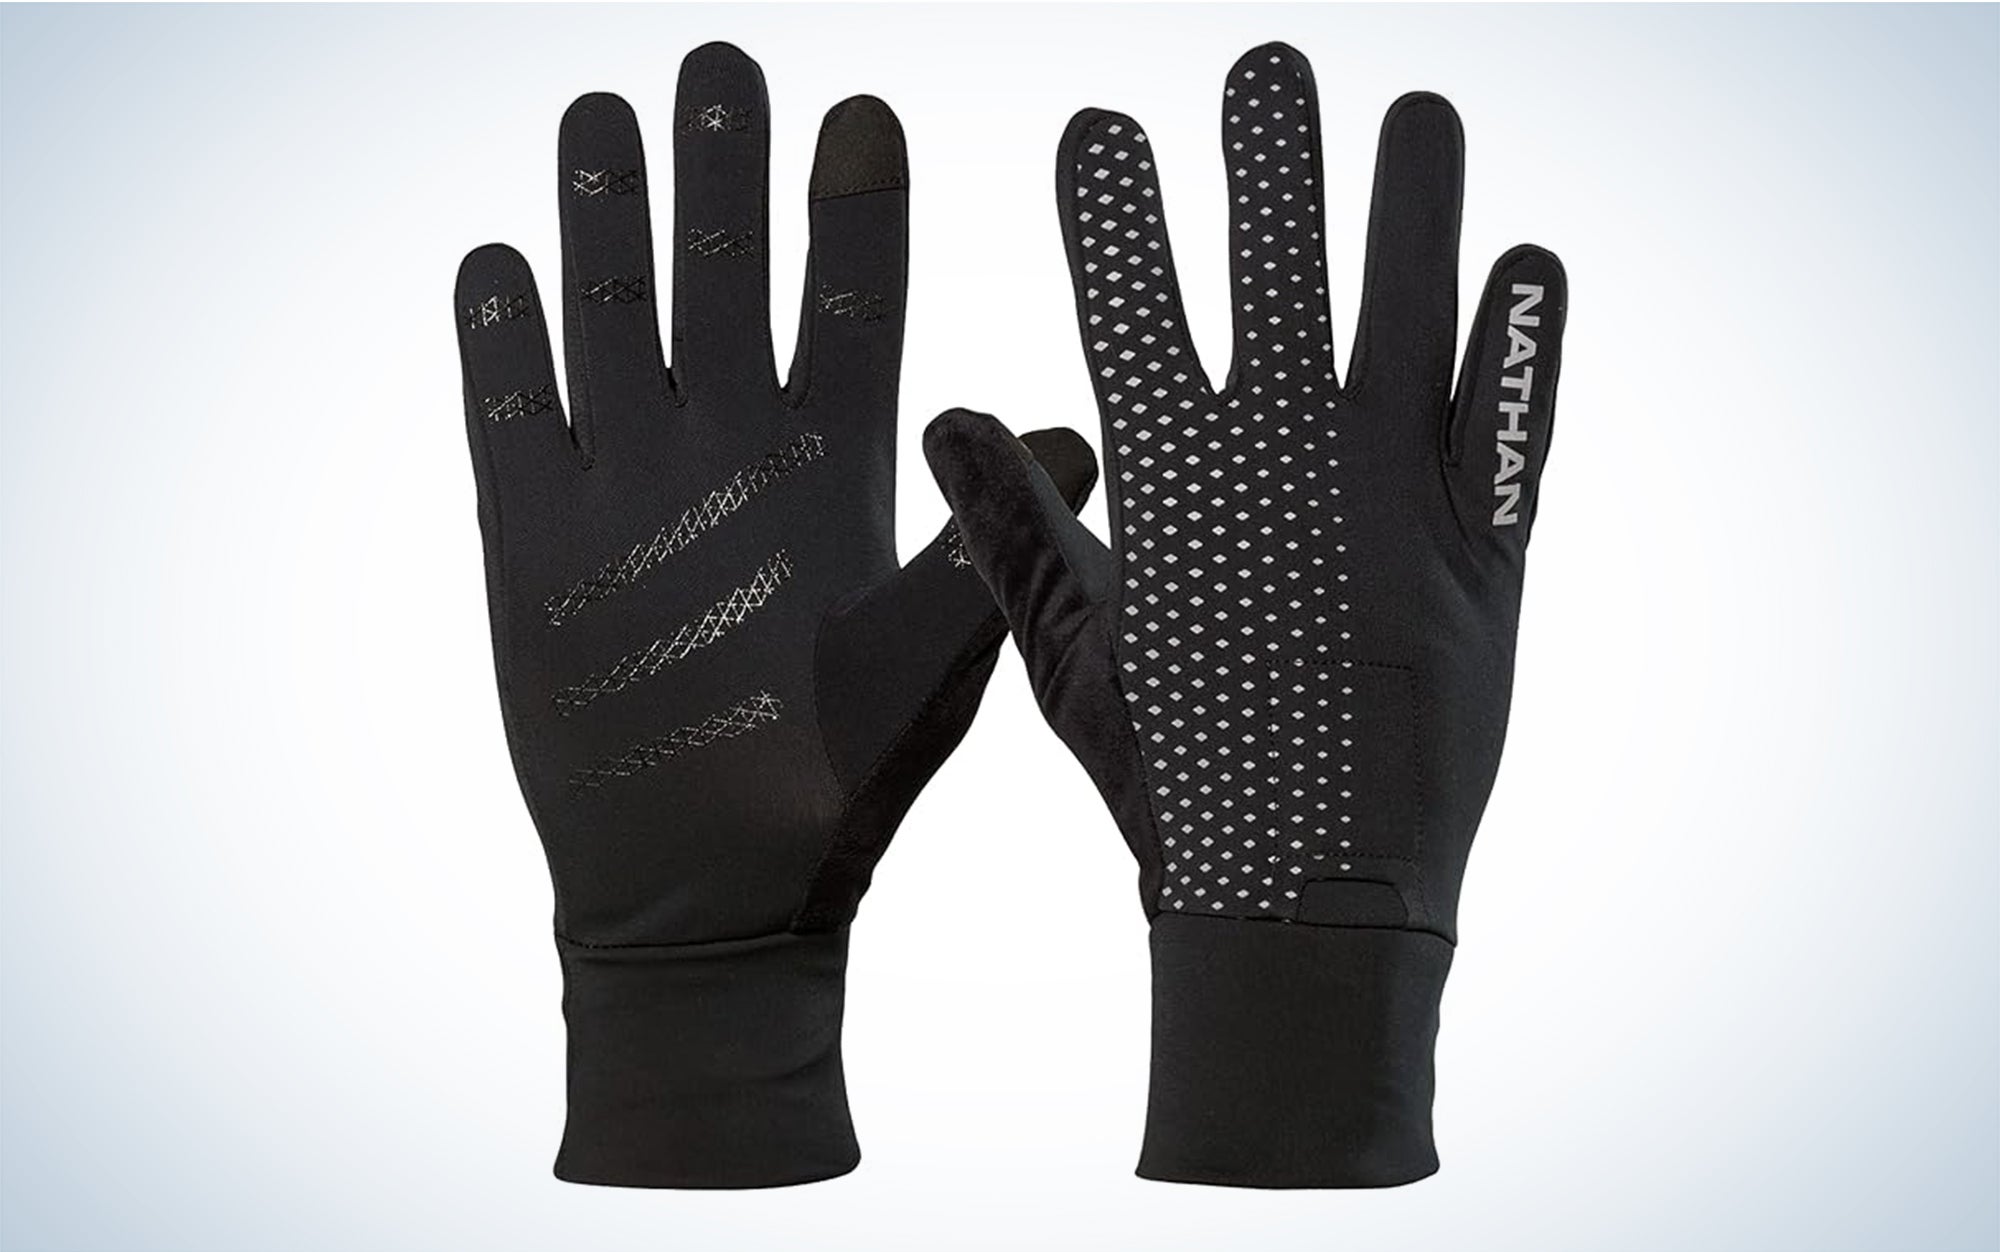 We tested the Nathan HyperNight Reflective Gloves.